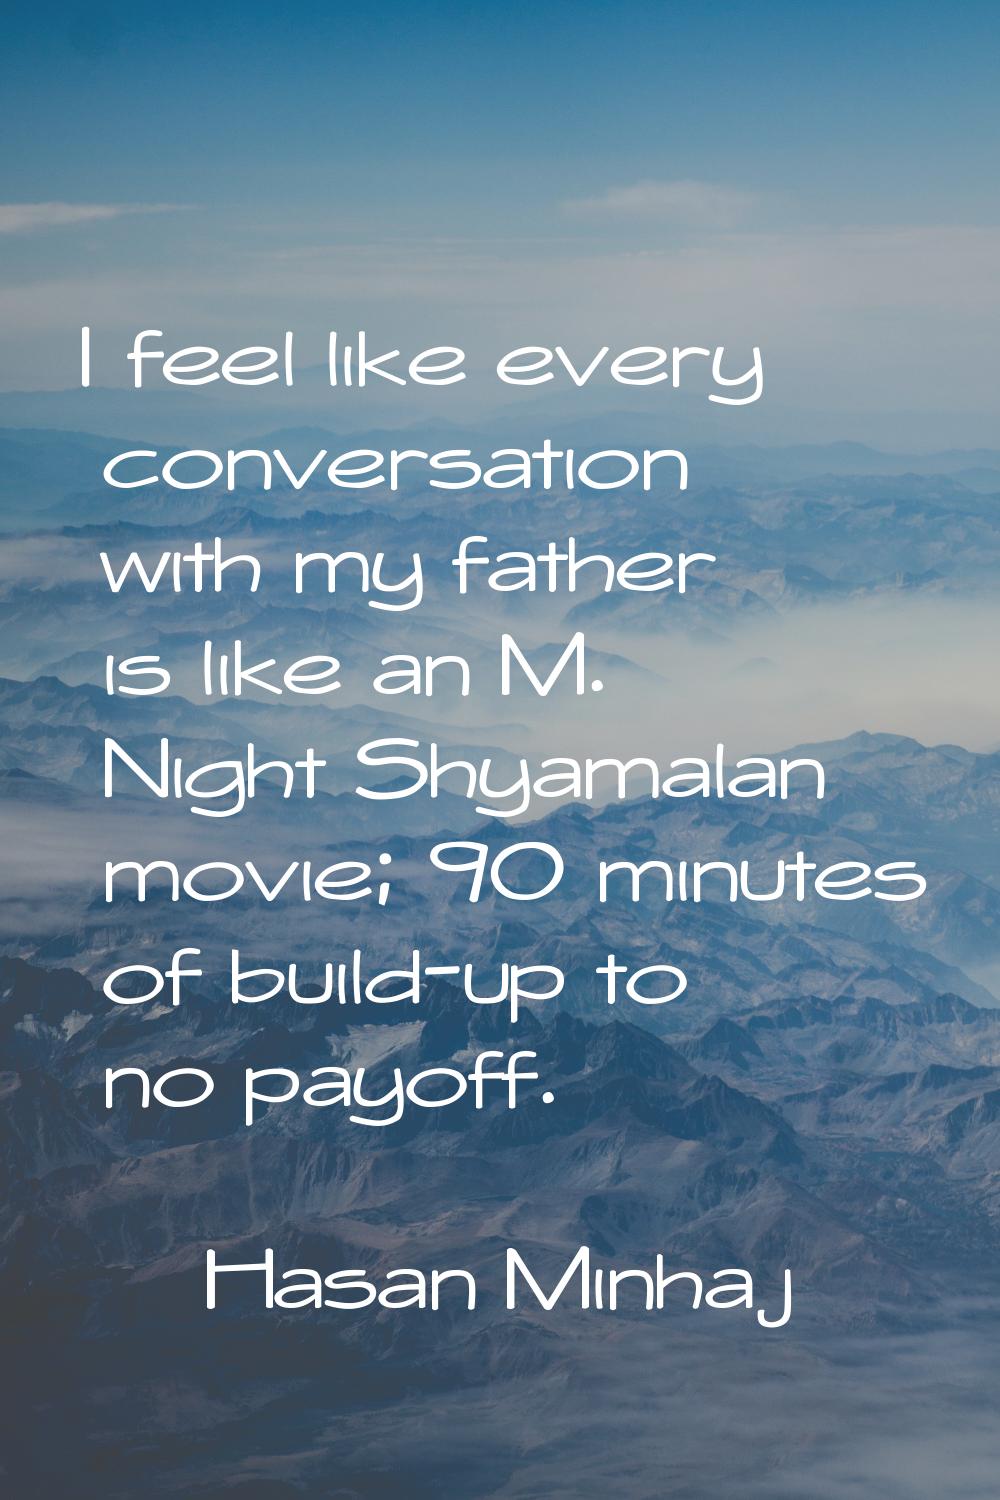 I feel like every conversation with my father is like an M. Night Shyamalan movie; 90 minutes of bu